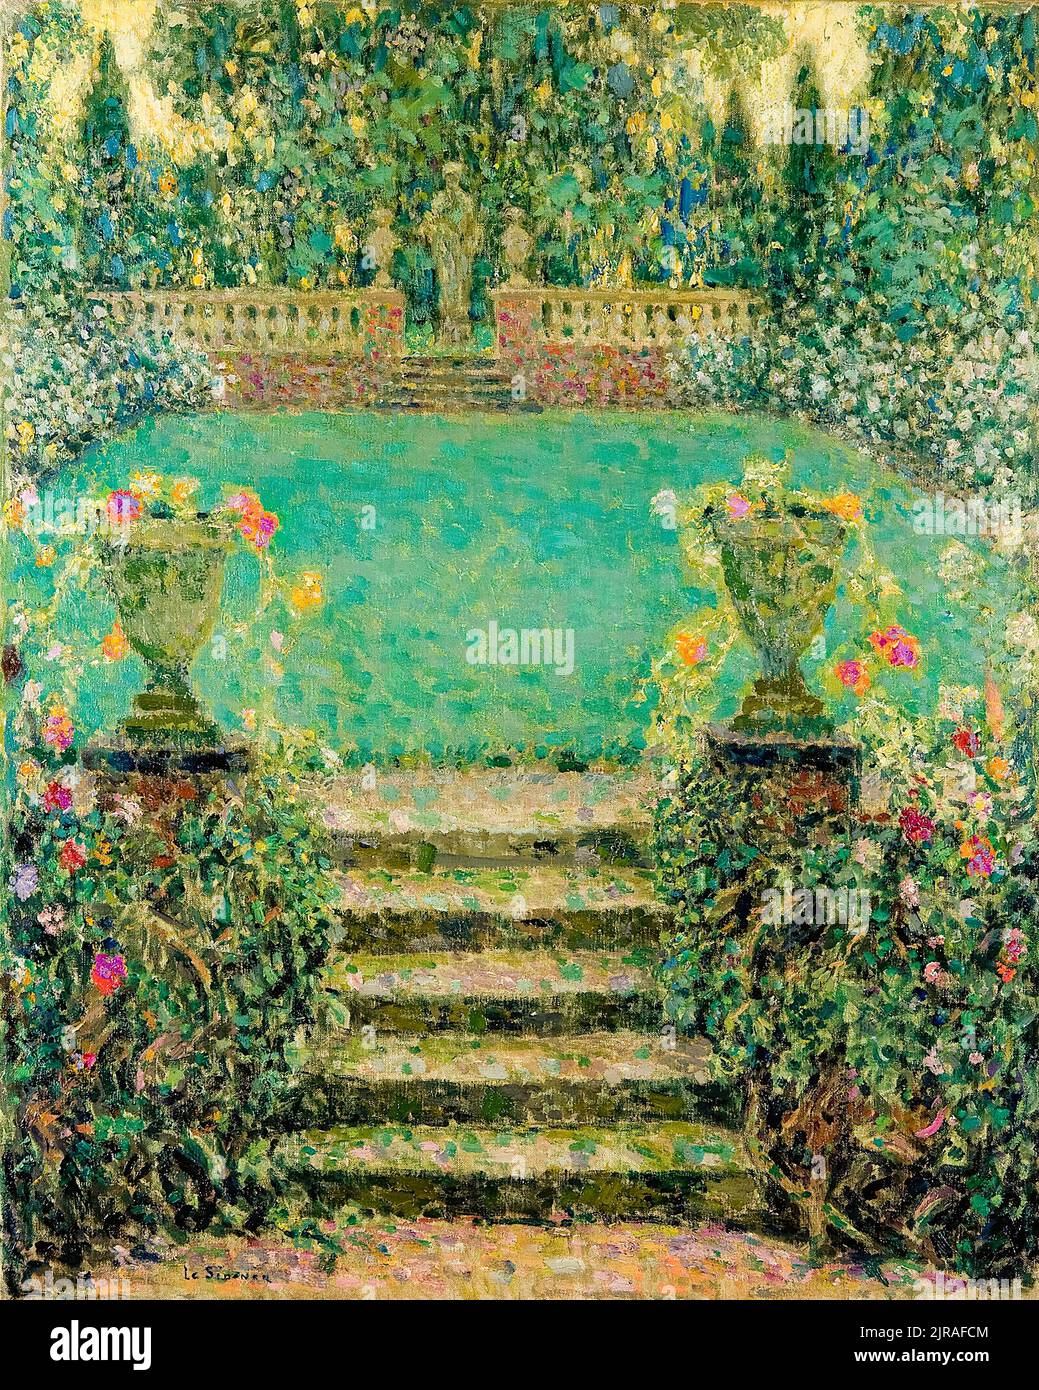 Henri Le Sidaner, Les Marches Du Jardin, Gerberoy (The Garden Steps), painting in oil on canvas, 1931 Stock Photo